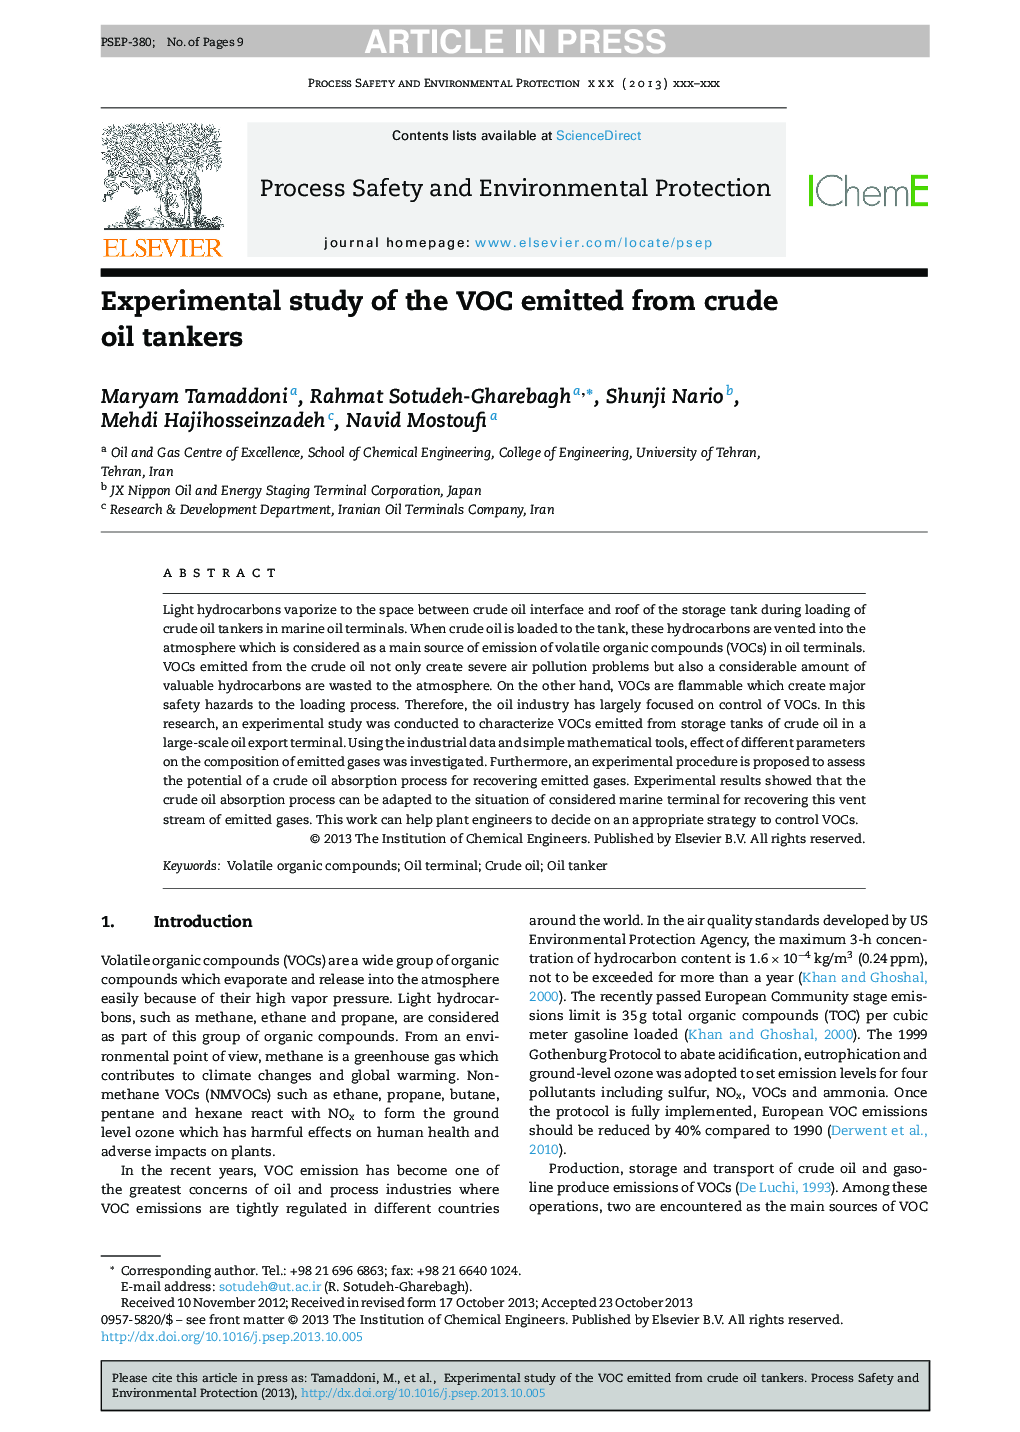 Experimental study of the VOC emitted from crude oil tankers